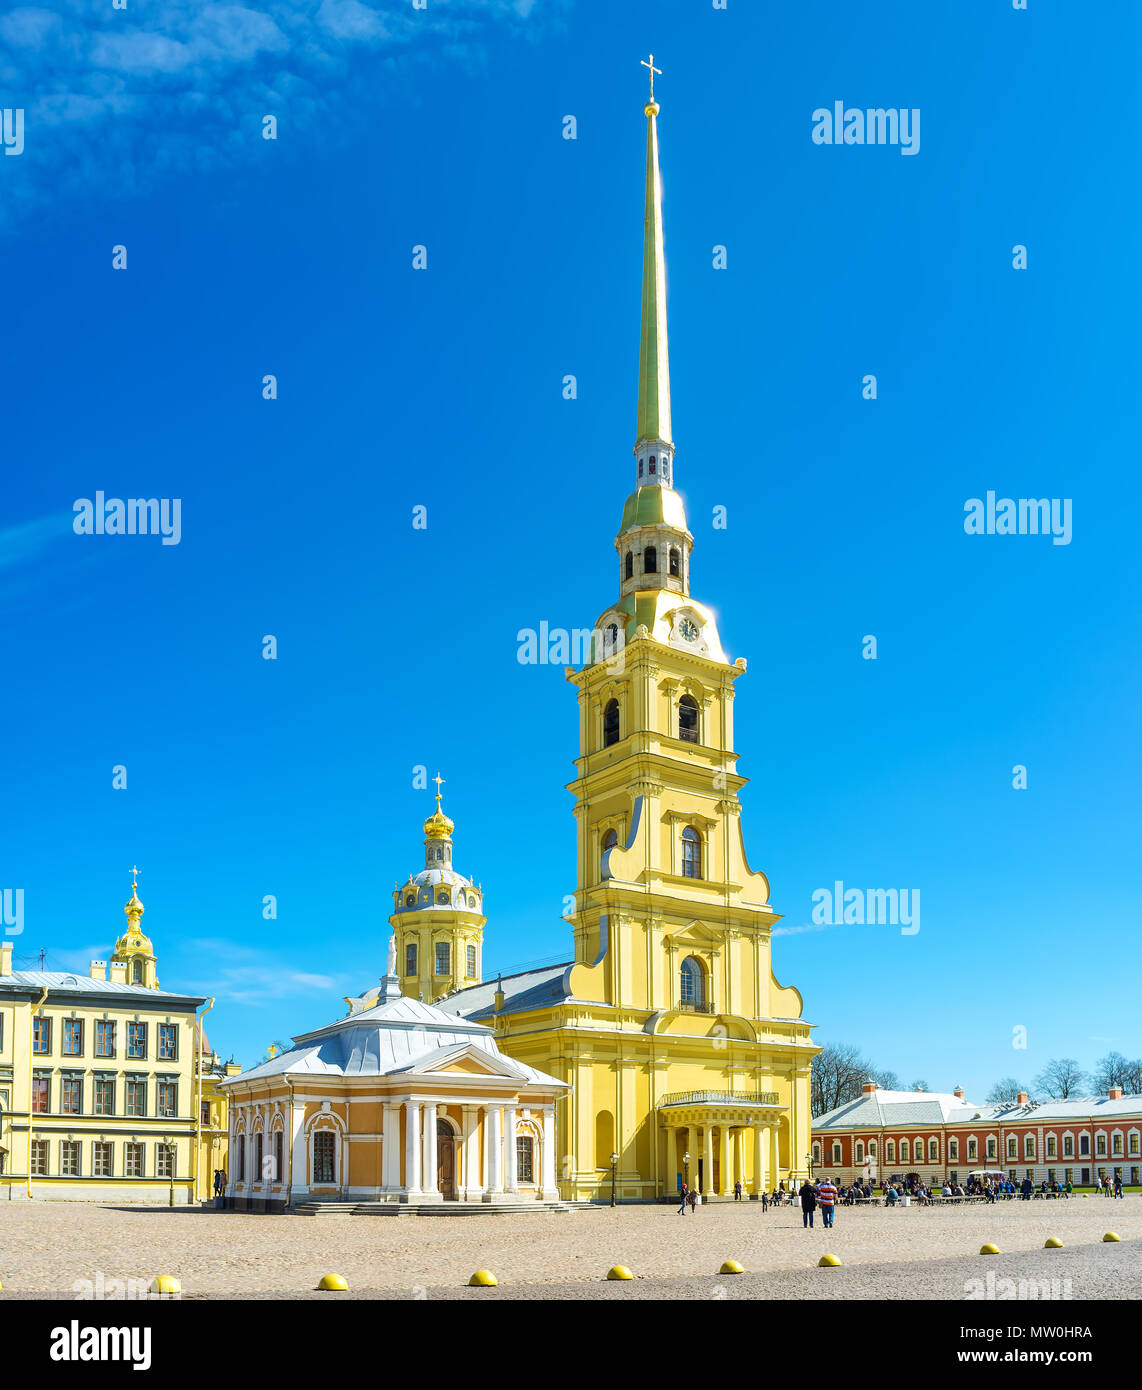 SAINT PETERSBURG, RUSSIA - APRIL 27, 2015: The beautiful high Peter and Paul Cathedral is the most notable landmark of the city, located in Peter and  Stock Photo